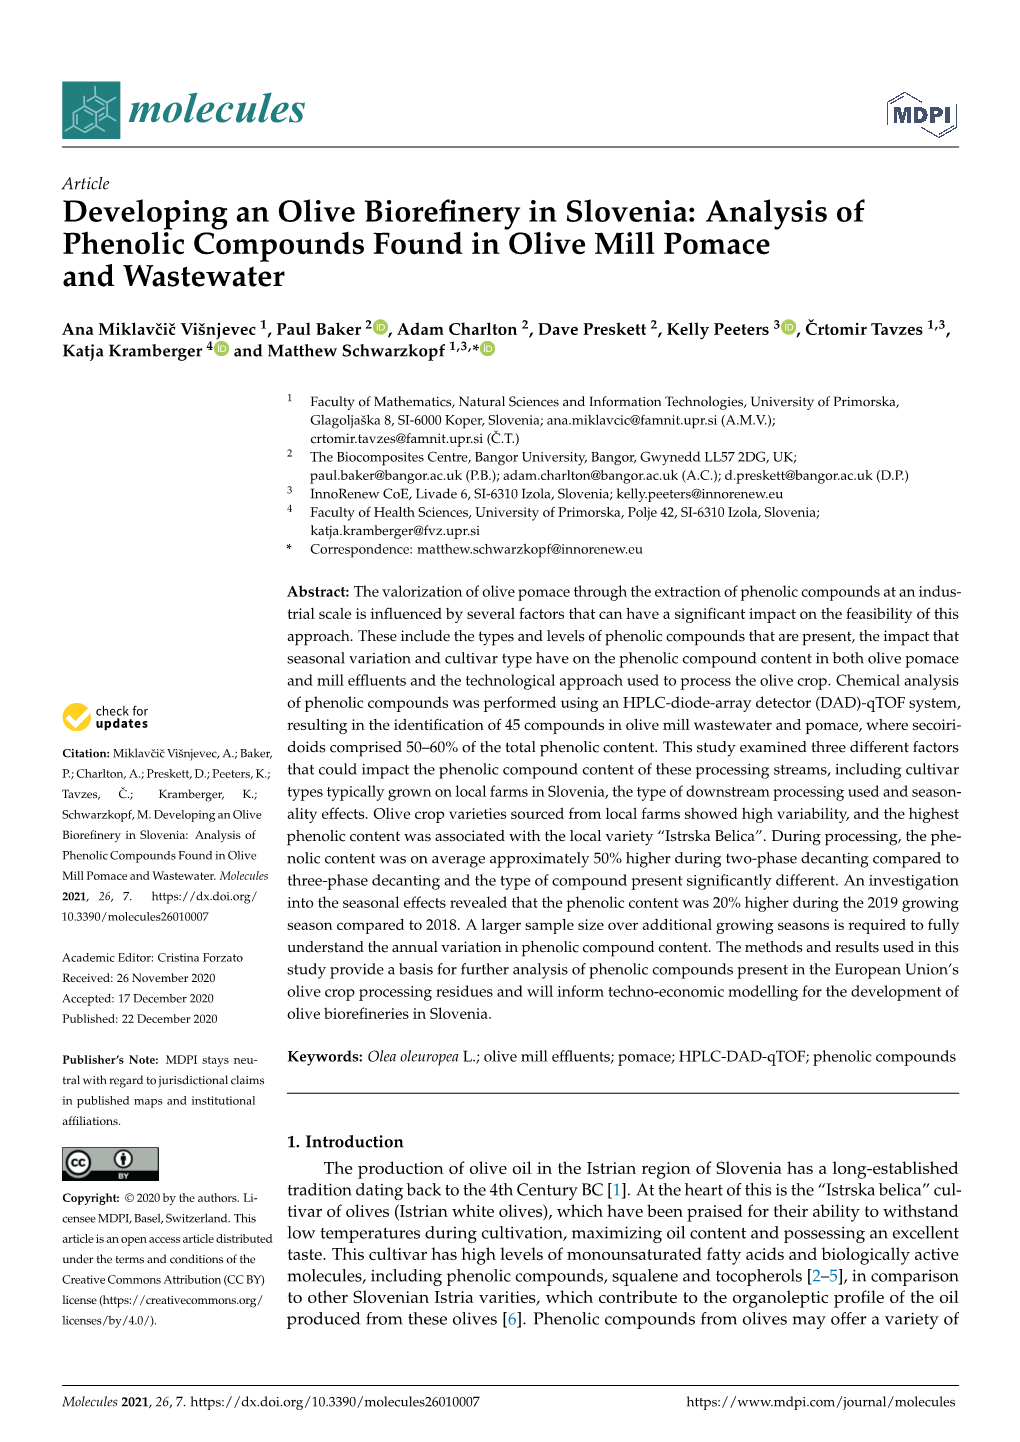 Analysis of Phenolic Compounds Found in Olive Mill Pomace and Wastewater